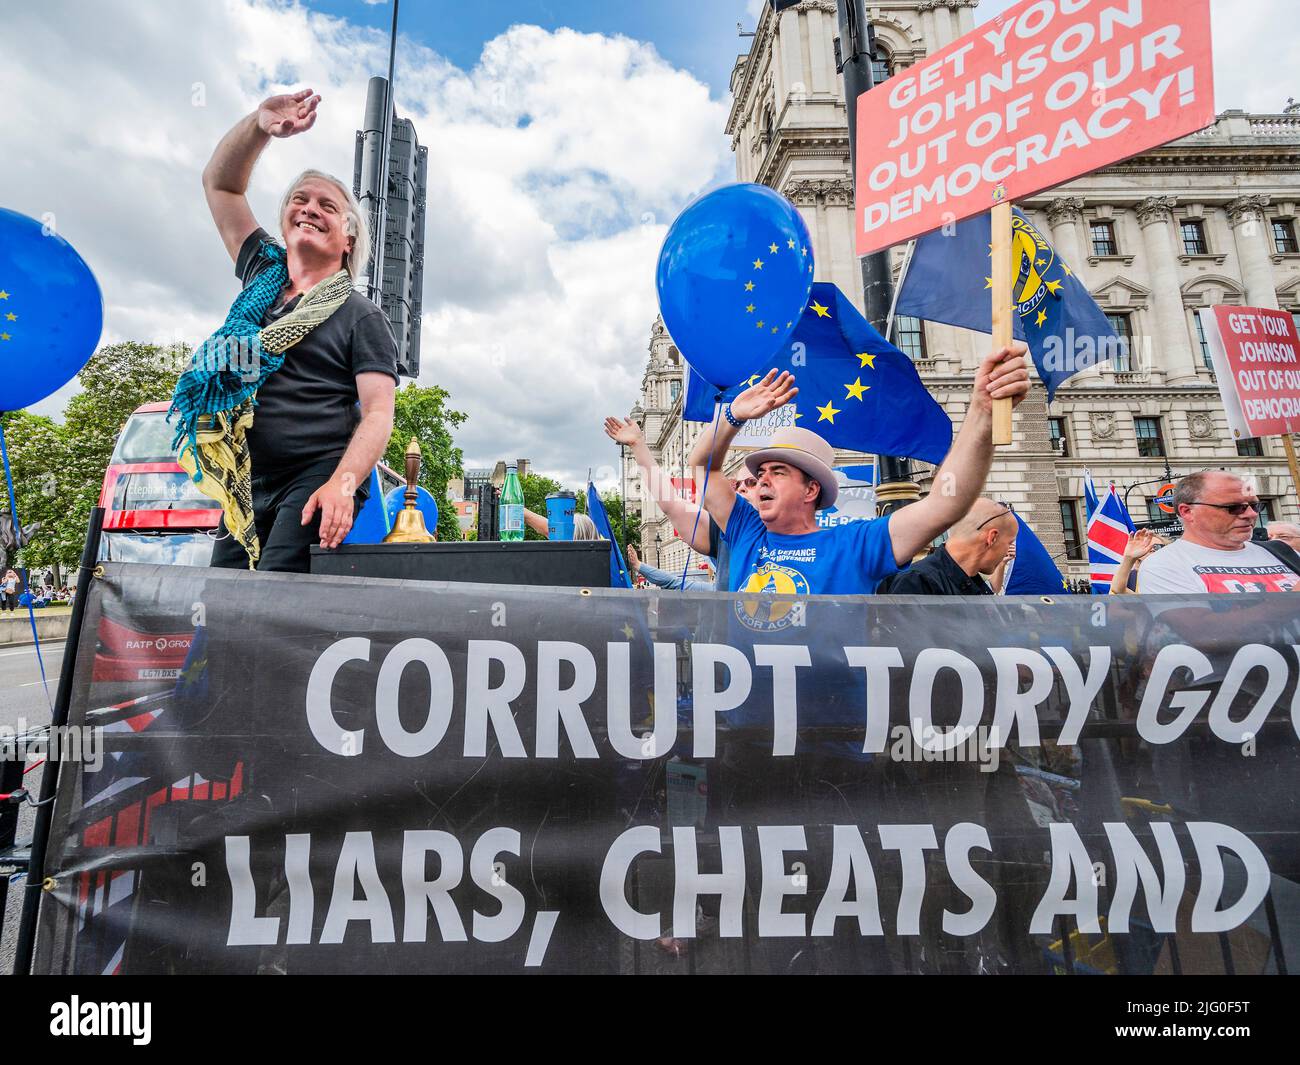 London, UK. 6th July, 2022. Corrupt Tory, Liars and Cheats banner - Protest (led by Steve Bray and SODEM) against Prime Minister Boris Johnson, while he is in Parliament for Prime Minister's Questions. They believe he and his government are 'corrupt and liars'. Credit: Guy Bell/Alamy Live News Stock Photo